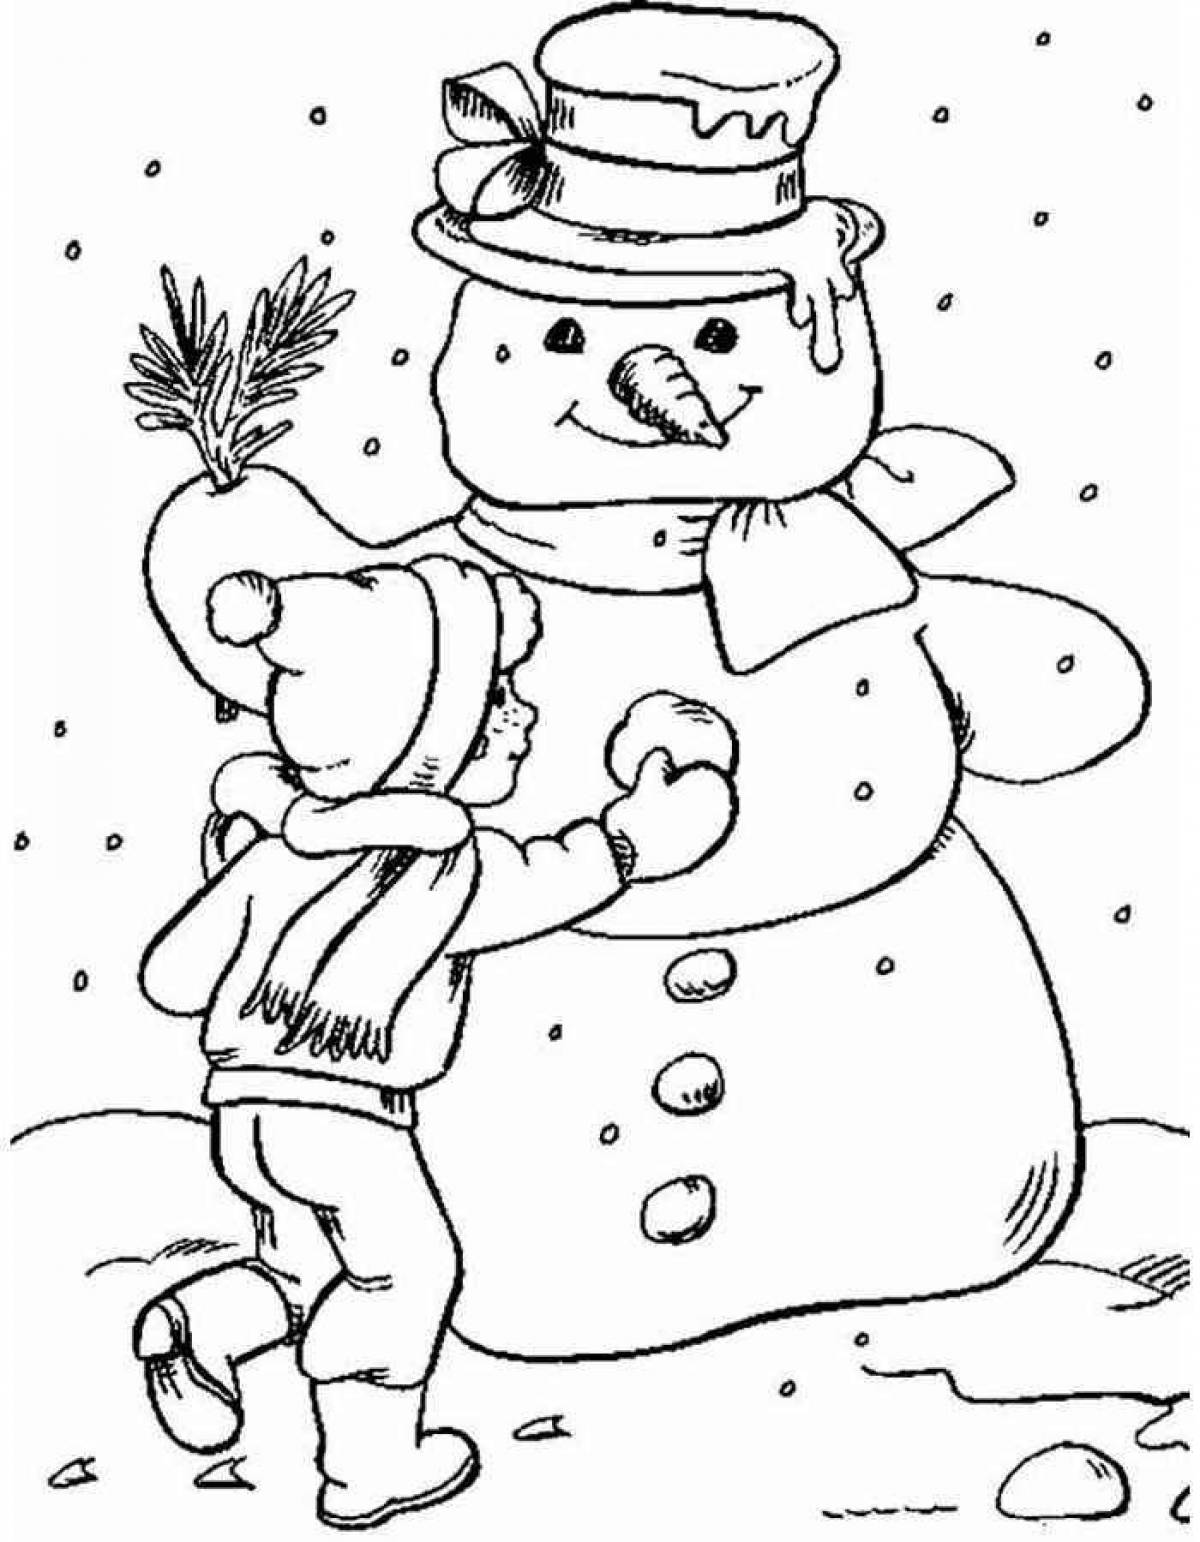 Funny snowman coloring pages